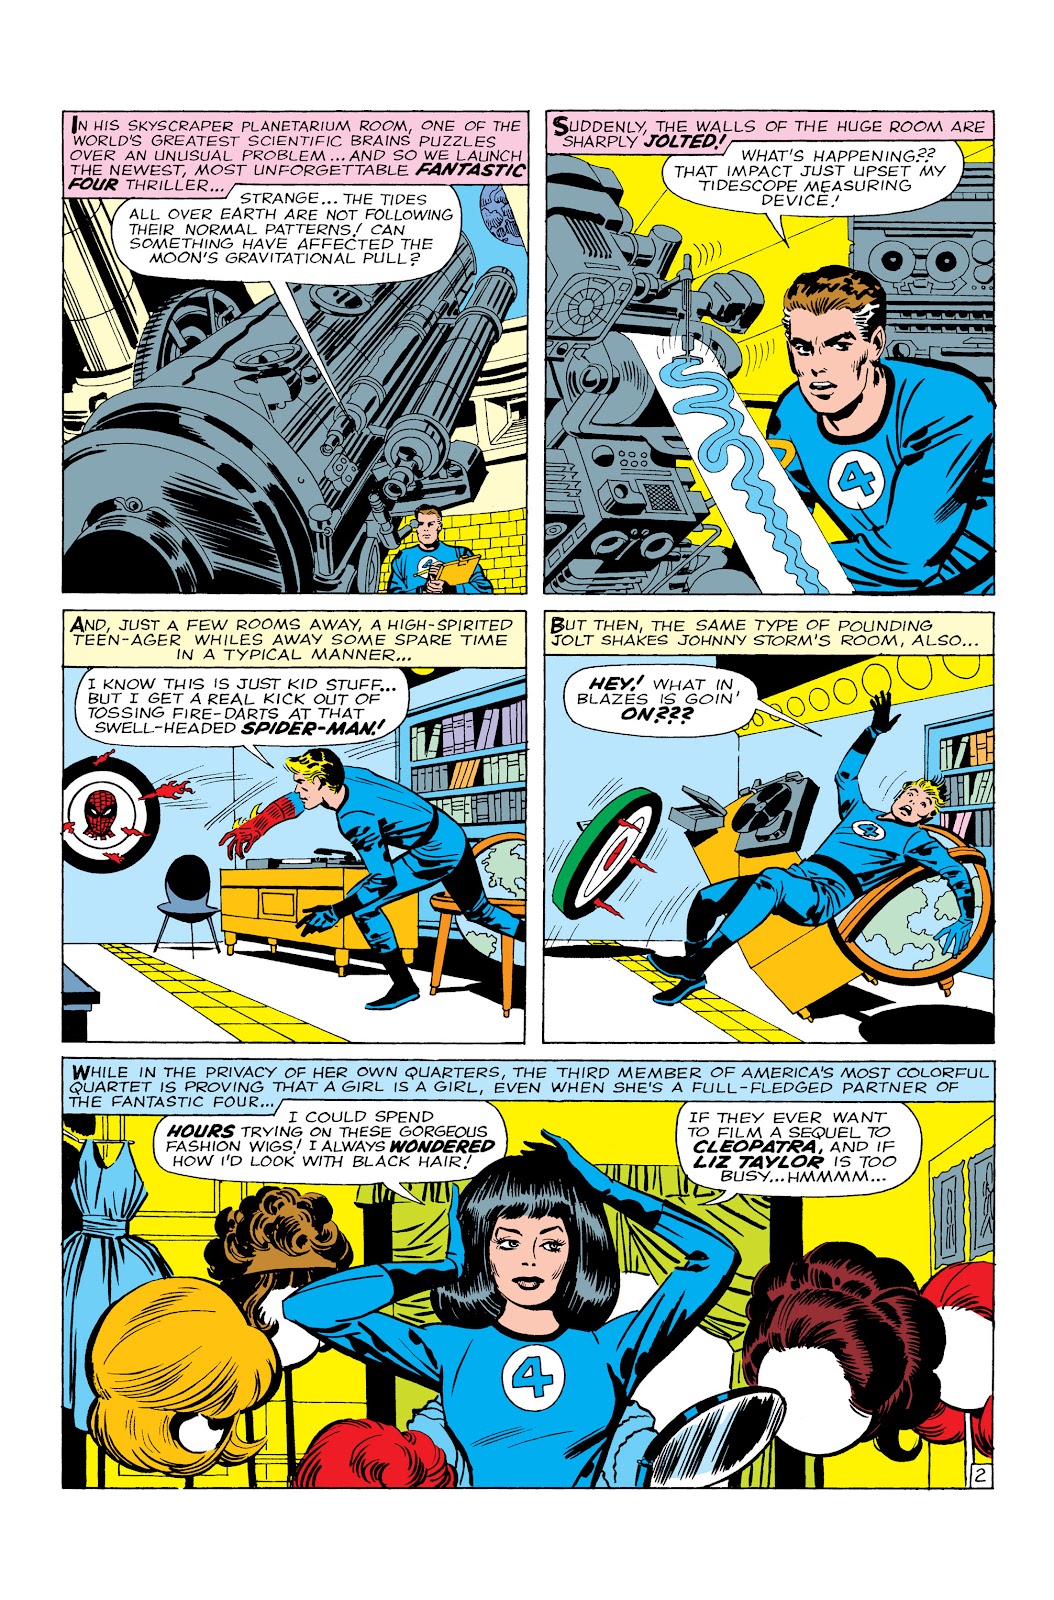 Read online Marvel Masterworks: The Fantastic Four comic - Issue # TPB 3 (Part 1) - 5